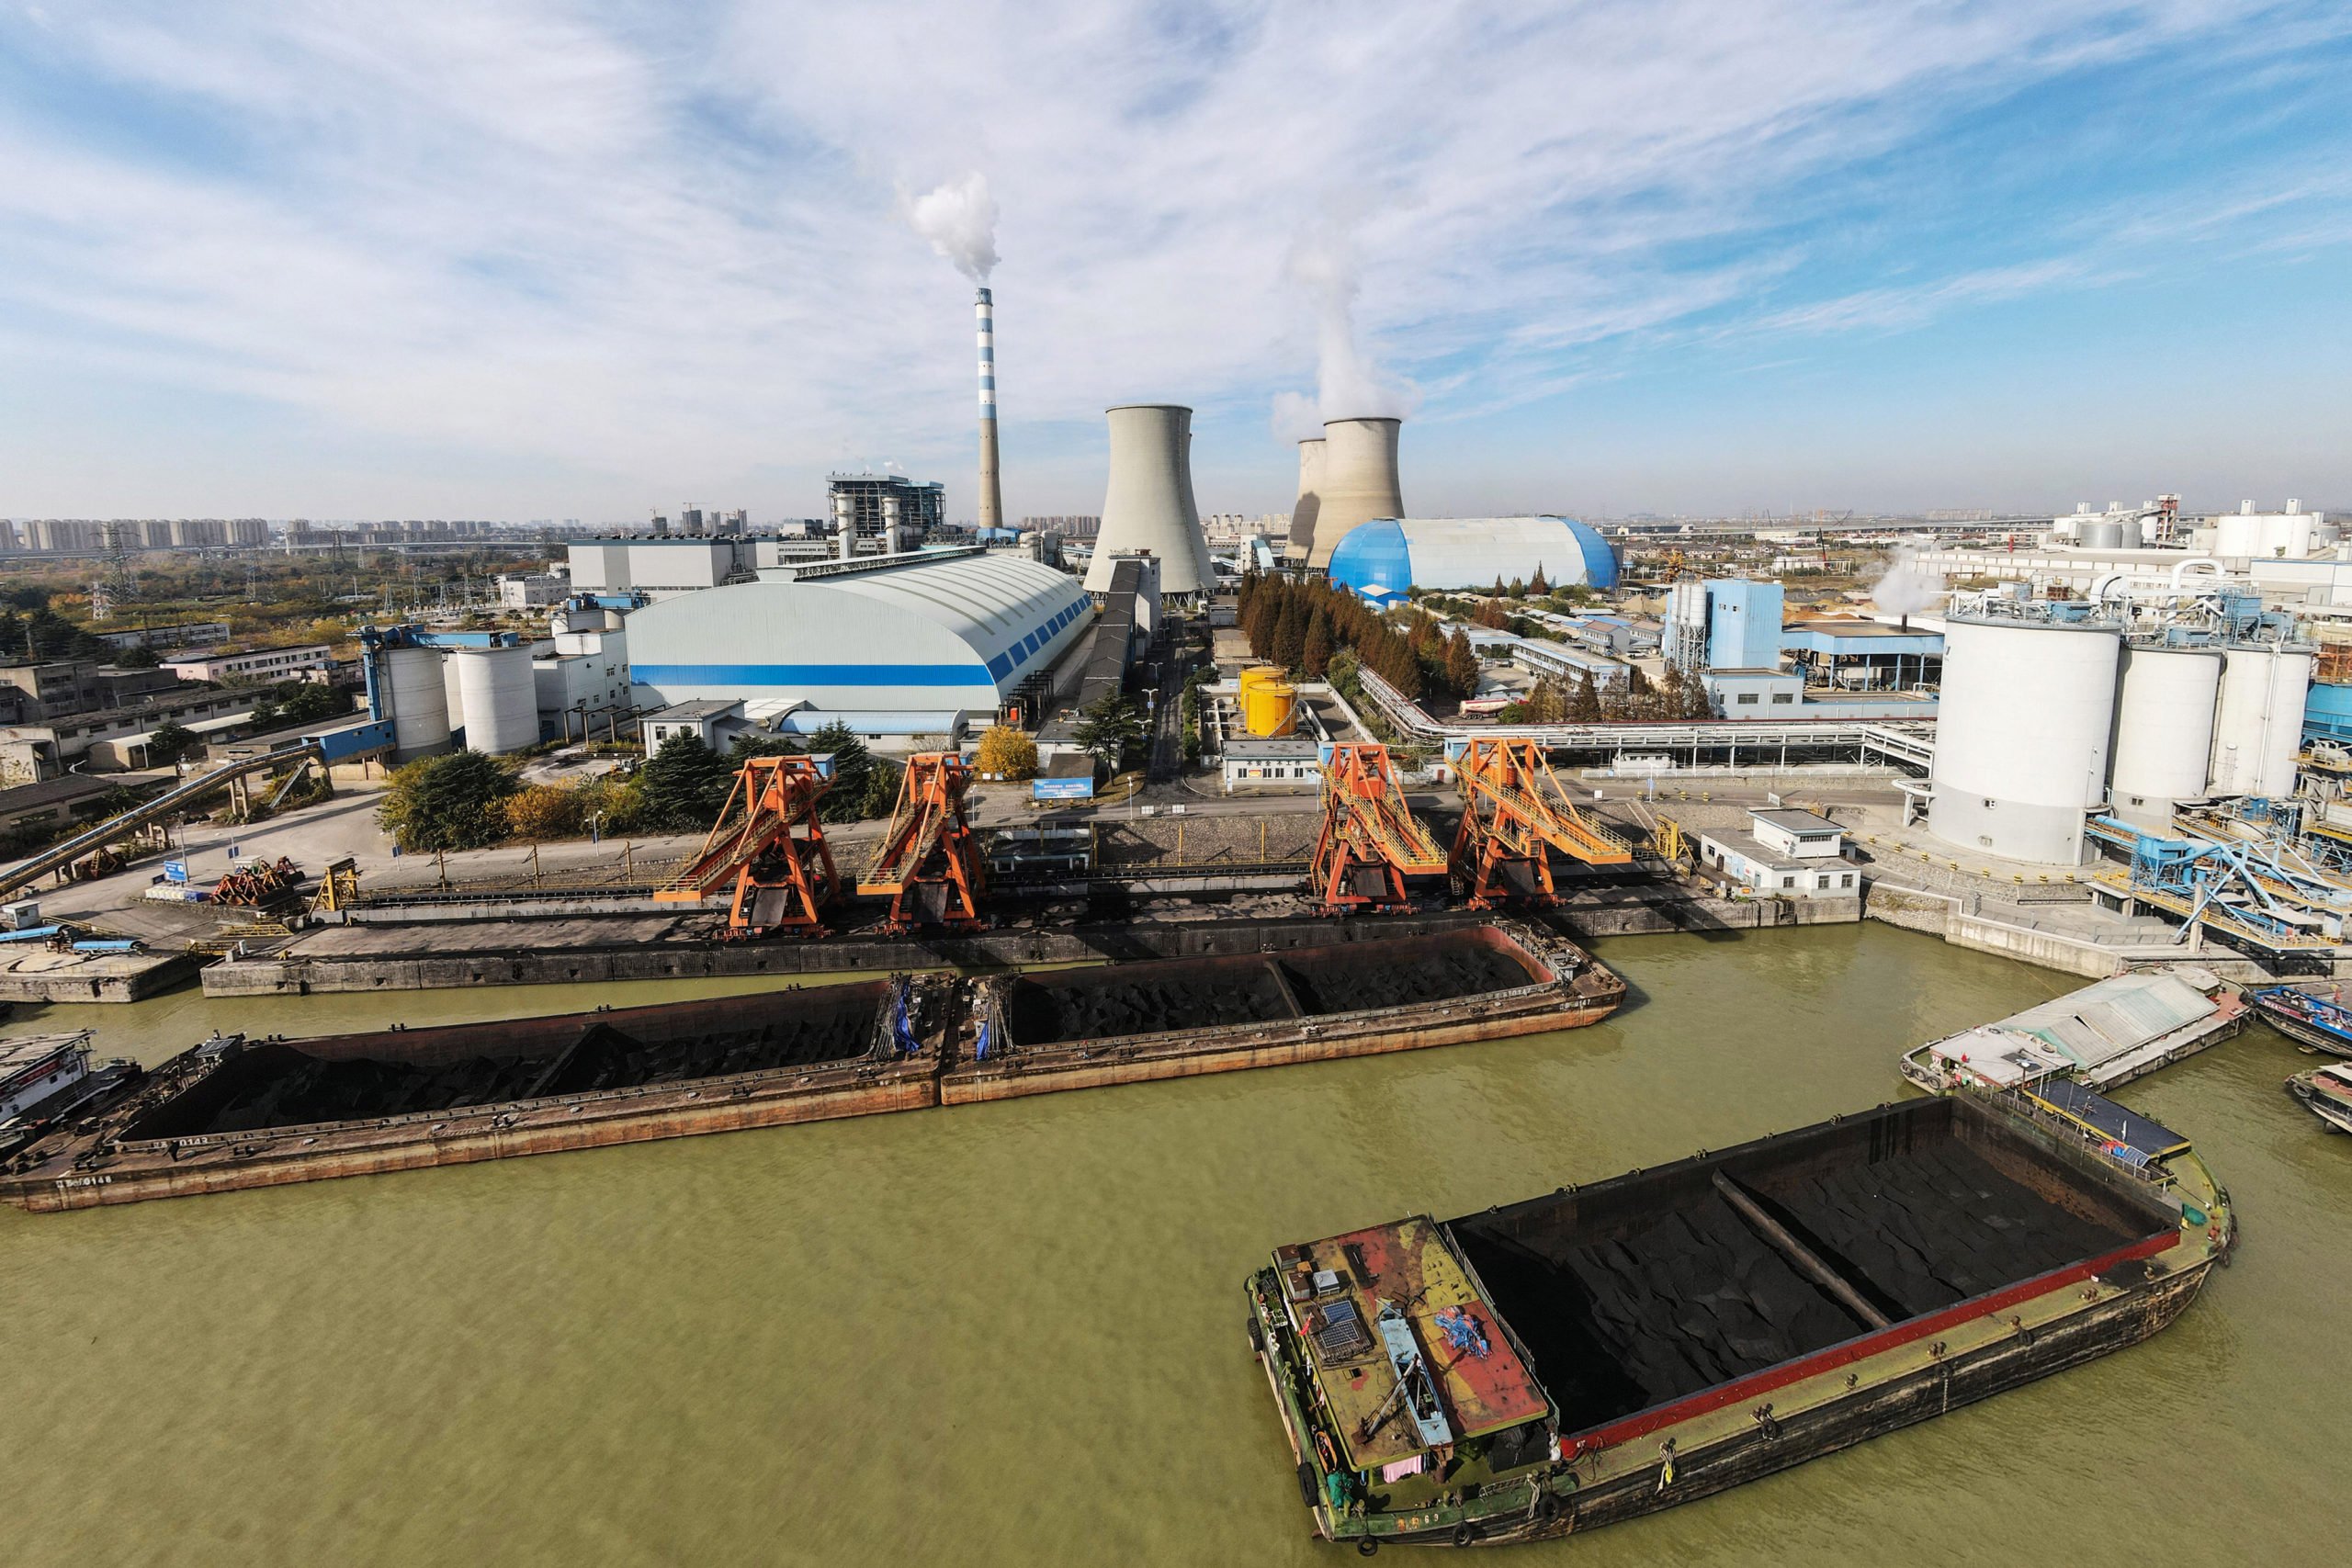 A barge unloads coal at a power station in Yangzhou, China on Nov. 23. - China OUT (STR/AFP via Getty Images)